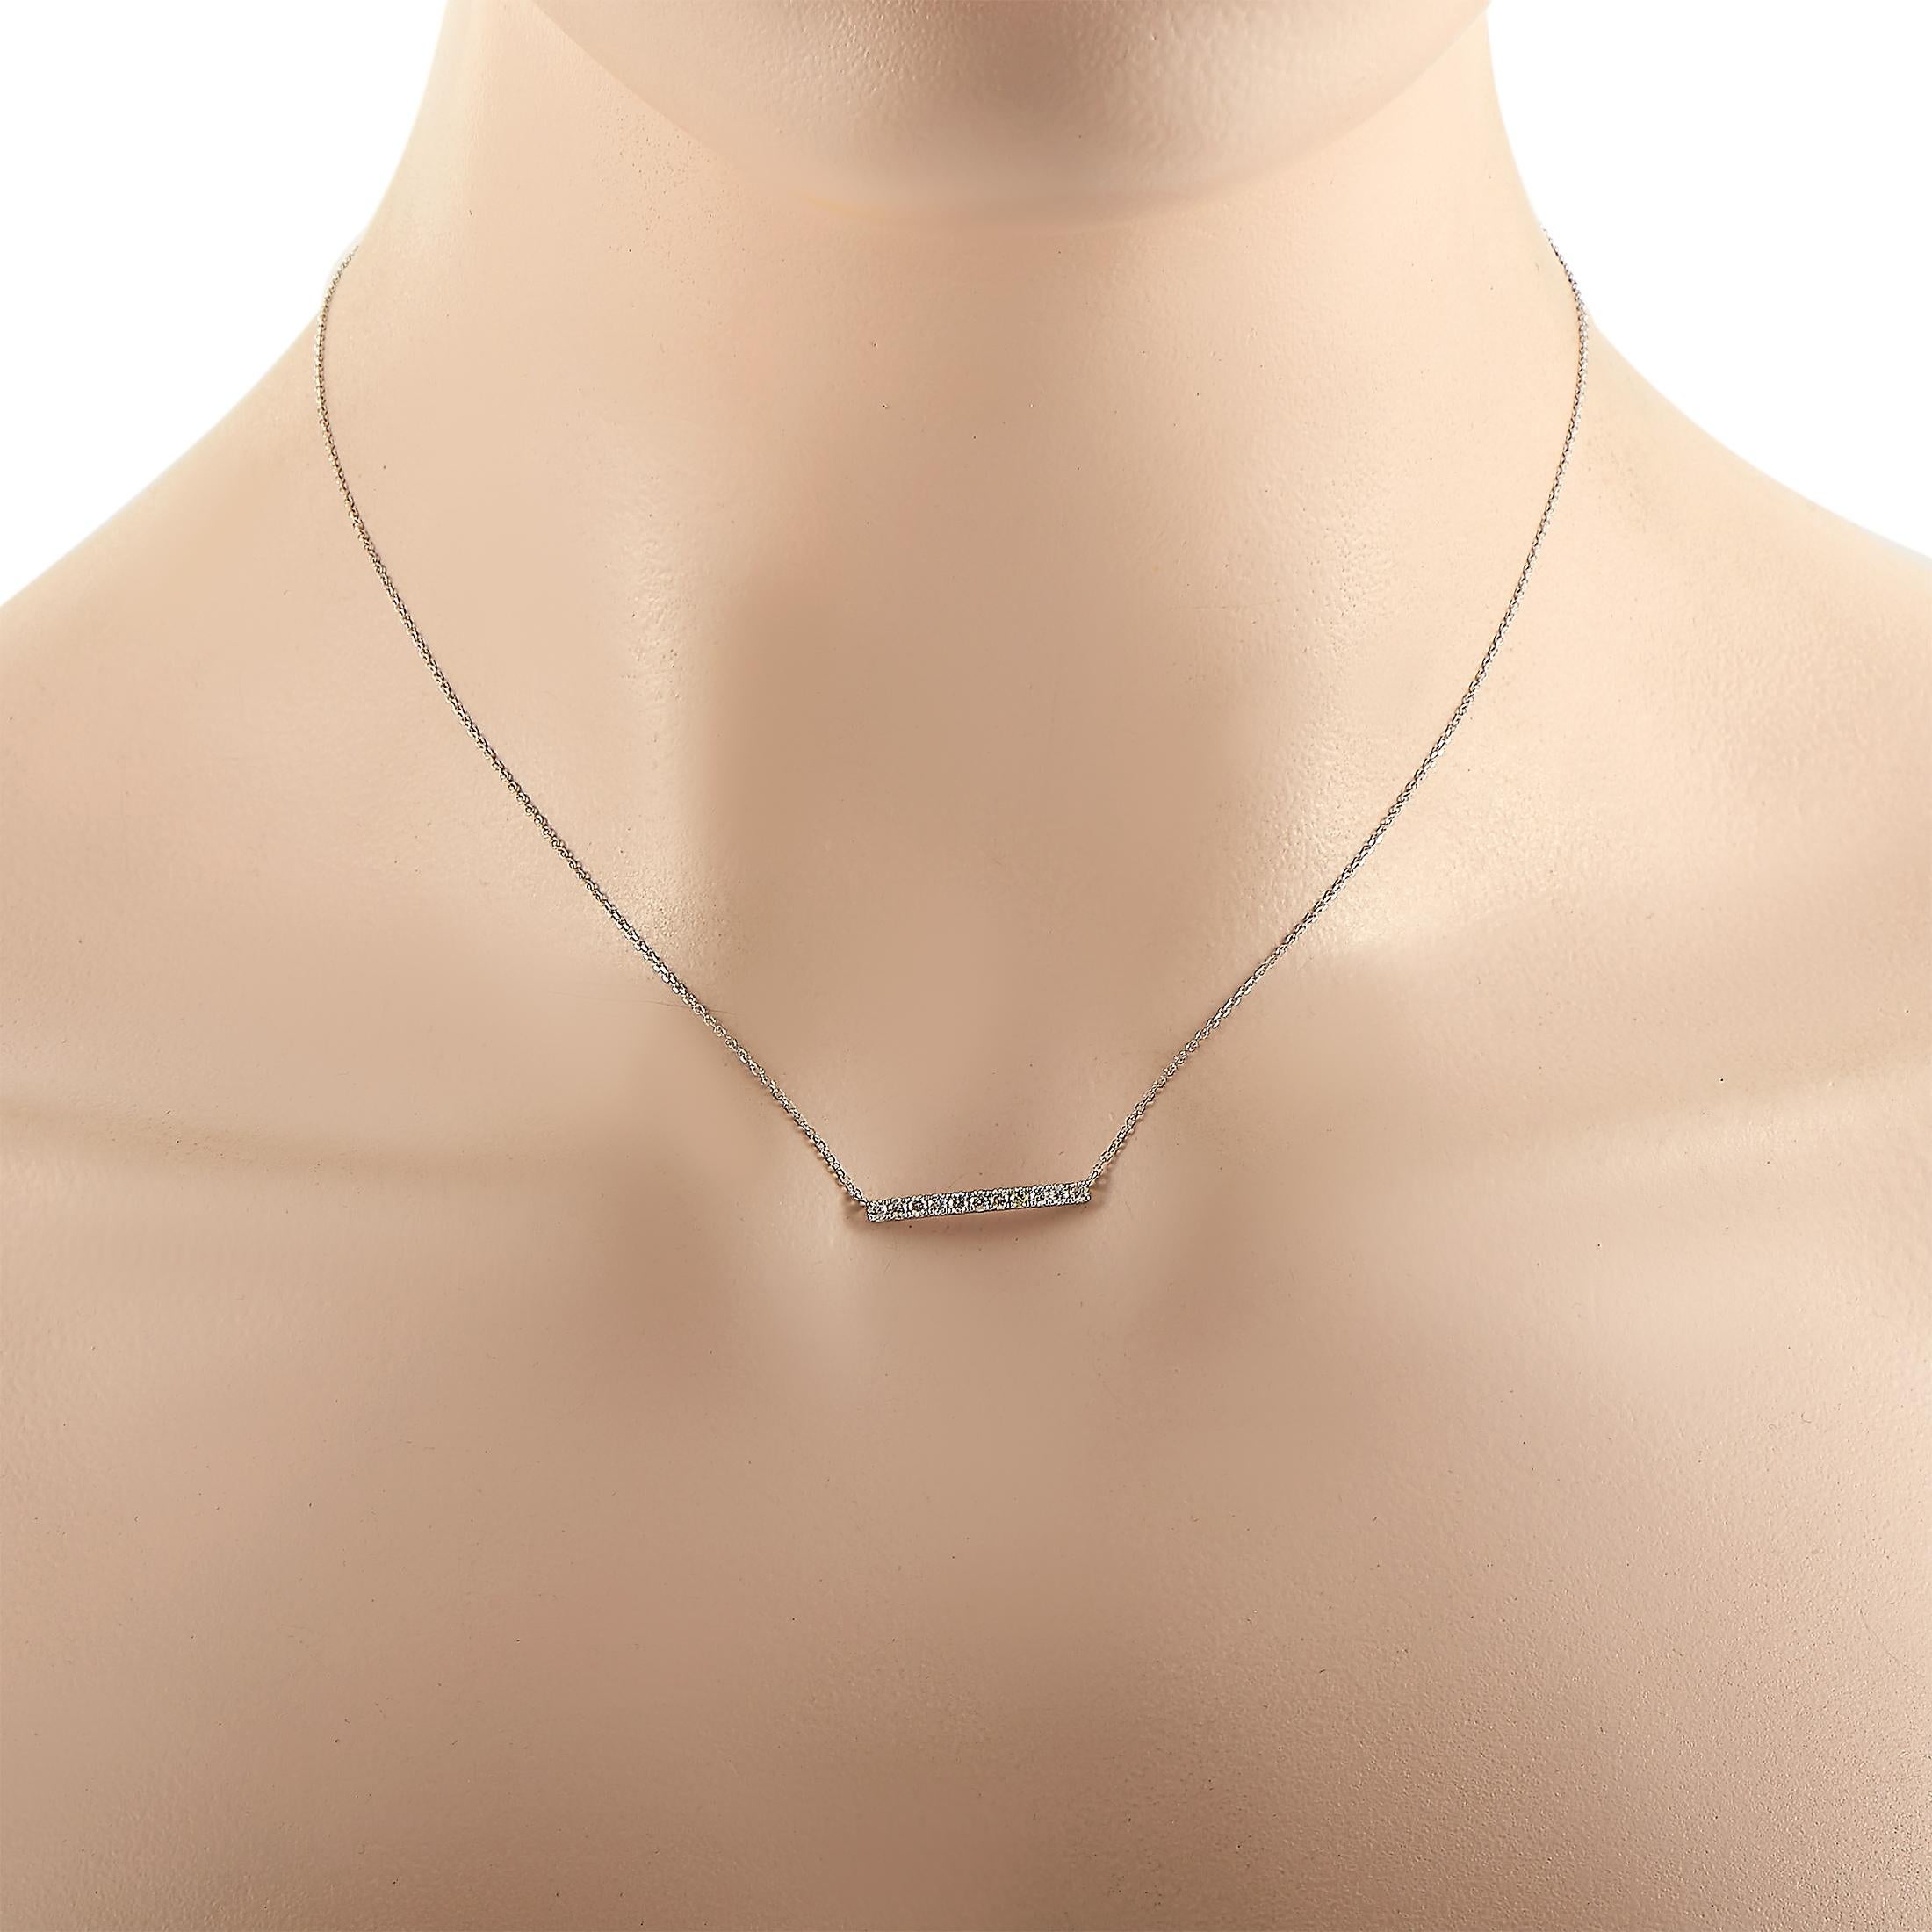 This LB Exclusive necklace is made of 14K white gold and embellished with diamonds that amount to 0.25 carats. The necklace weighs 2 grams and boasts a 16” chain and a pendant that measures 0.15” in length and 0.75” in width.
 
 Offered in brand new